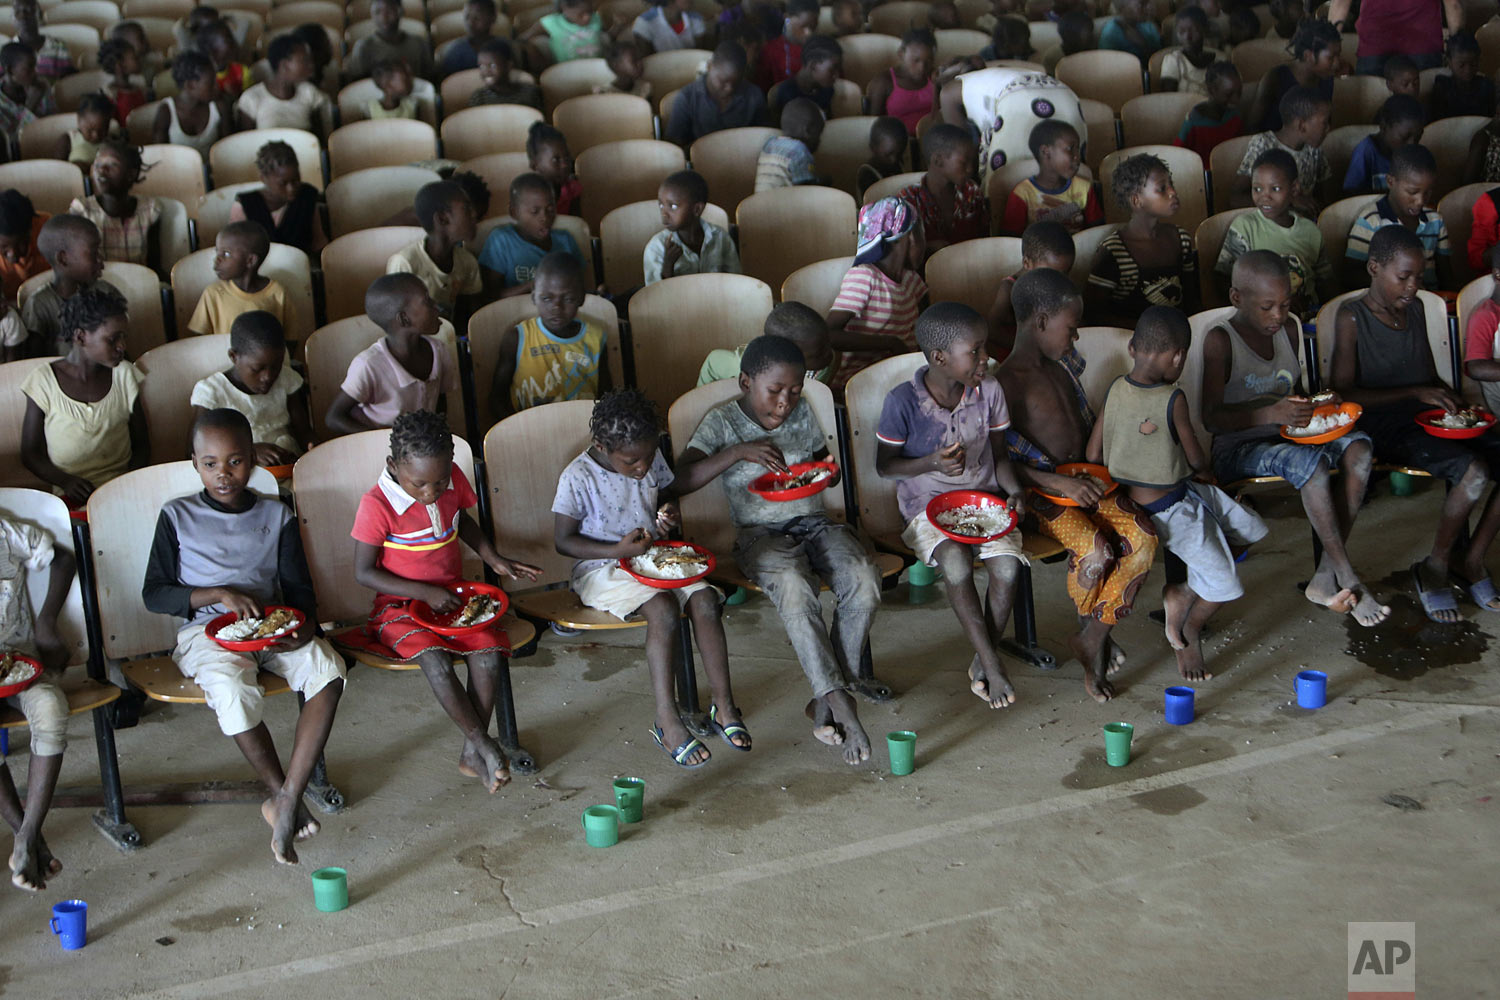  Children sit on benches in a hall after receiving food and drinking water at a temporary shelter for children in Pemba city, on the northeastern coast of Mozambique, Thursday May 2, 2019. More than 1 million children have been affected by a pair of 